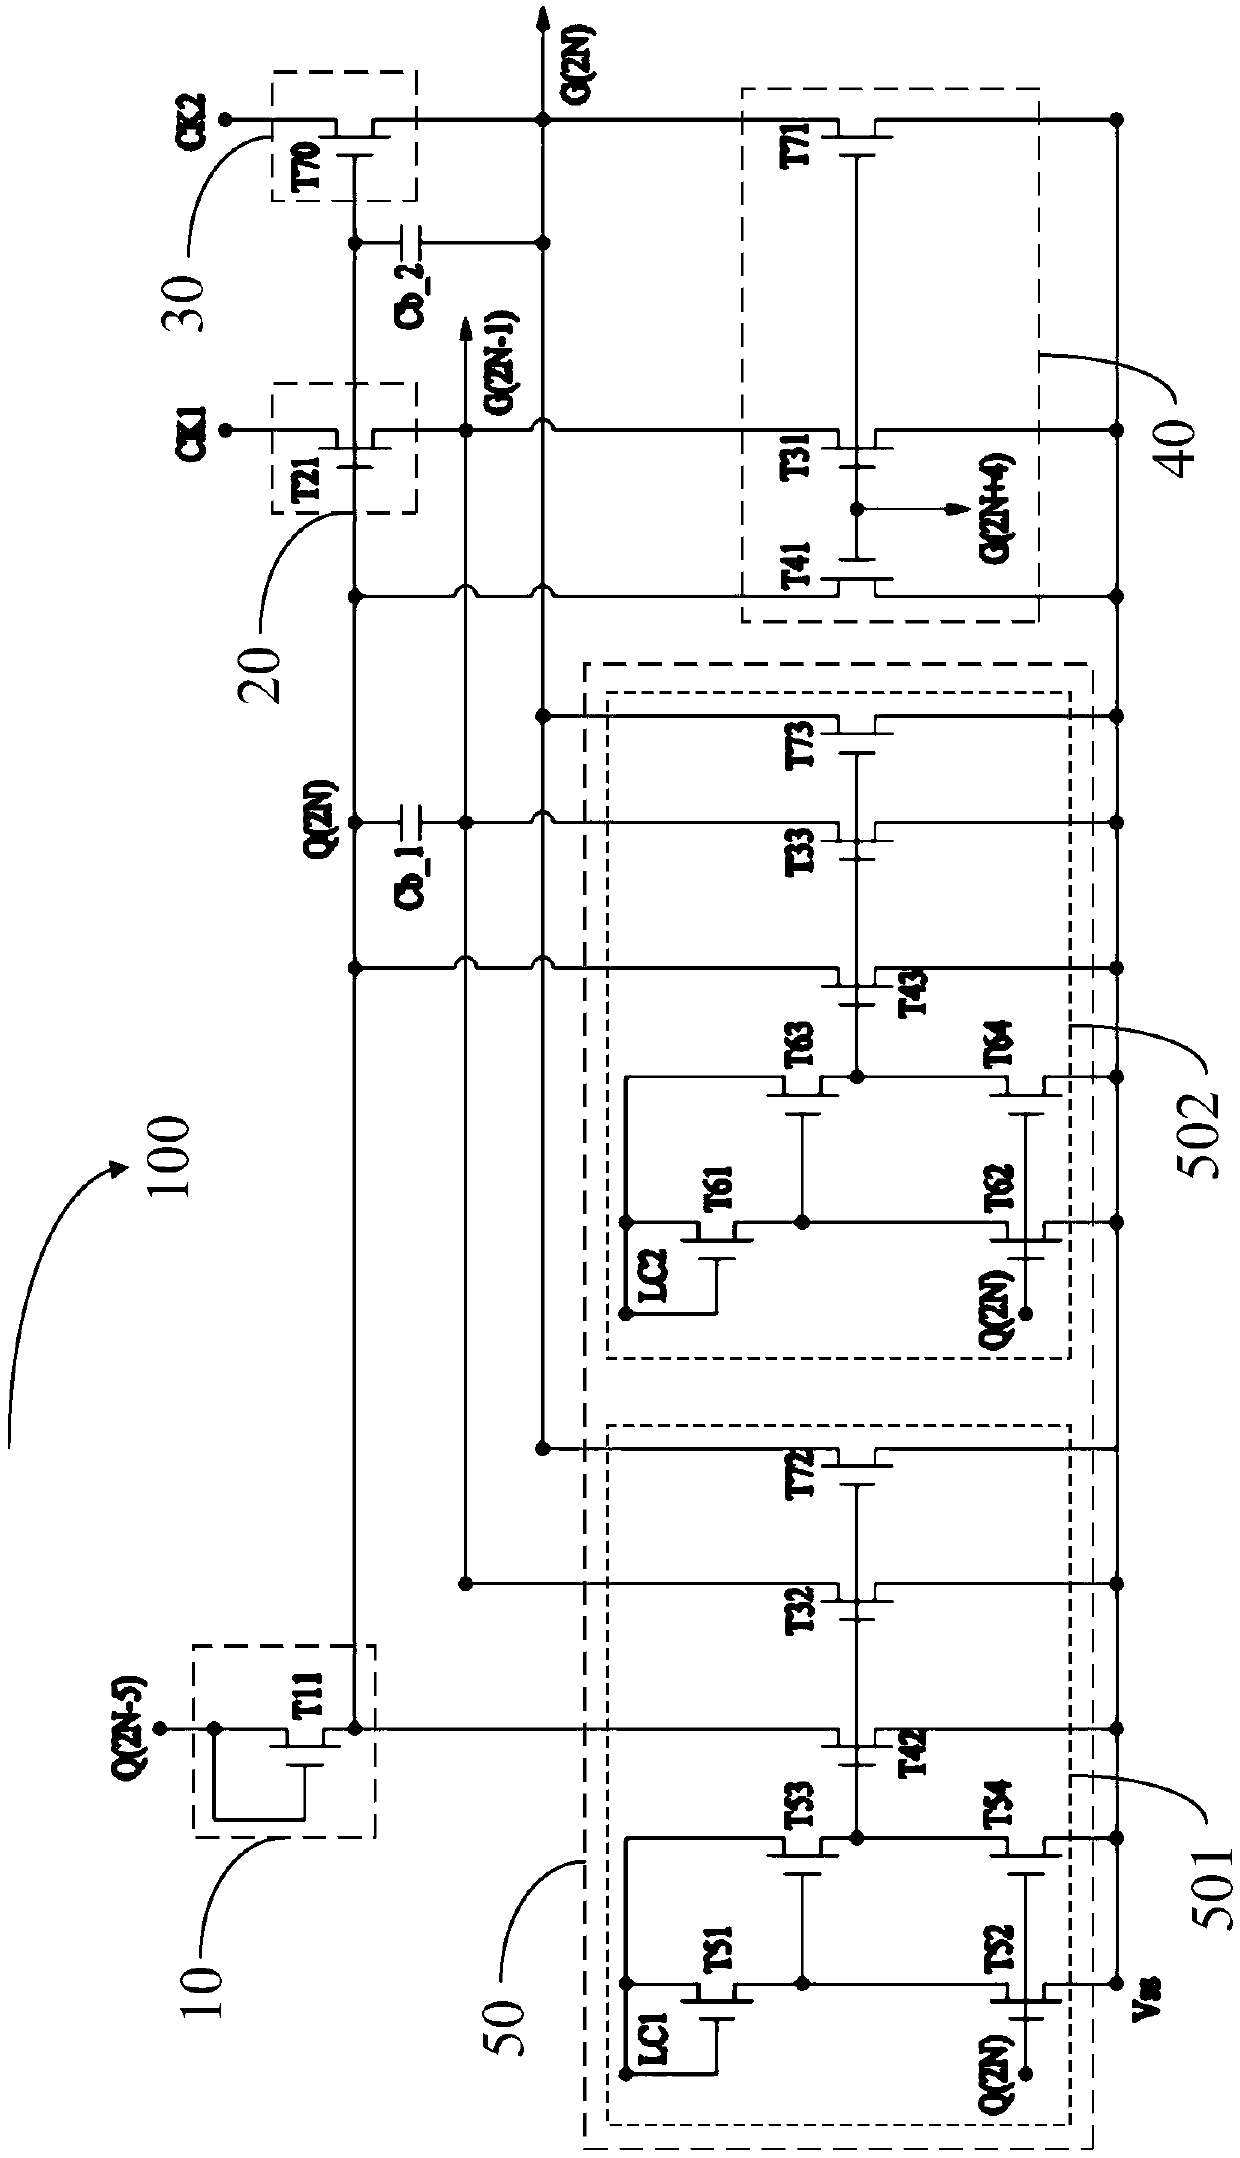 GOA (Gate Drive ON Array) device and gate drive circuit